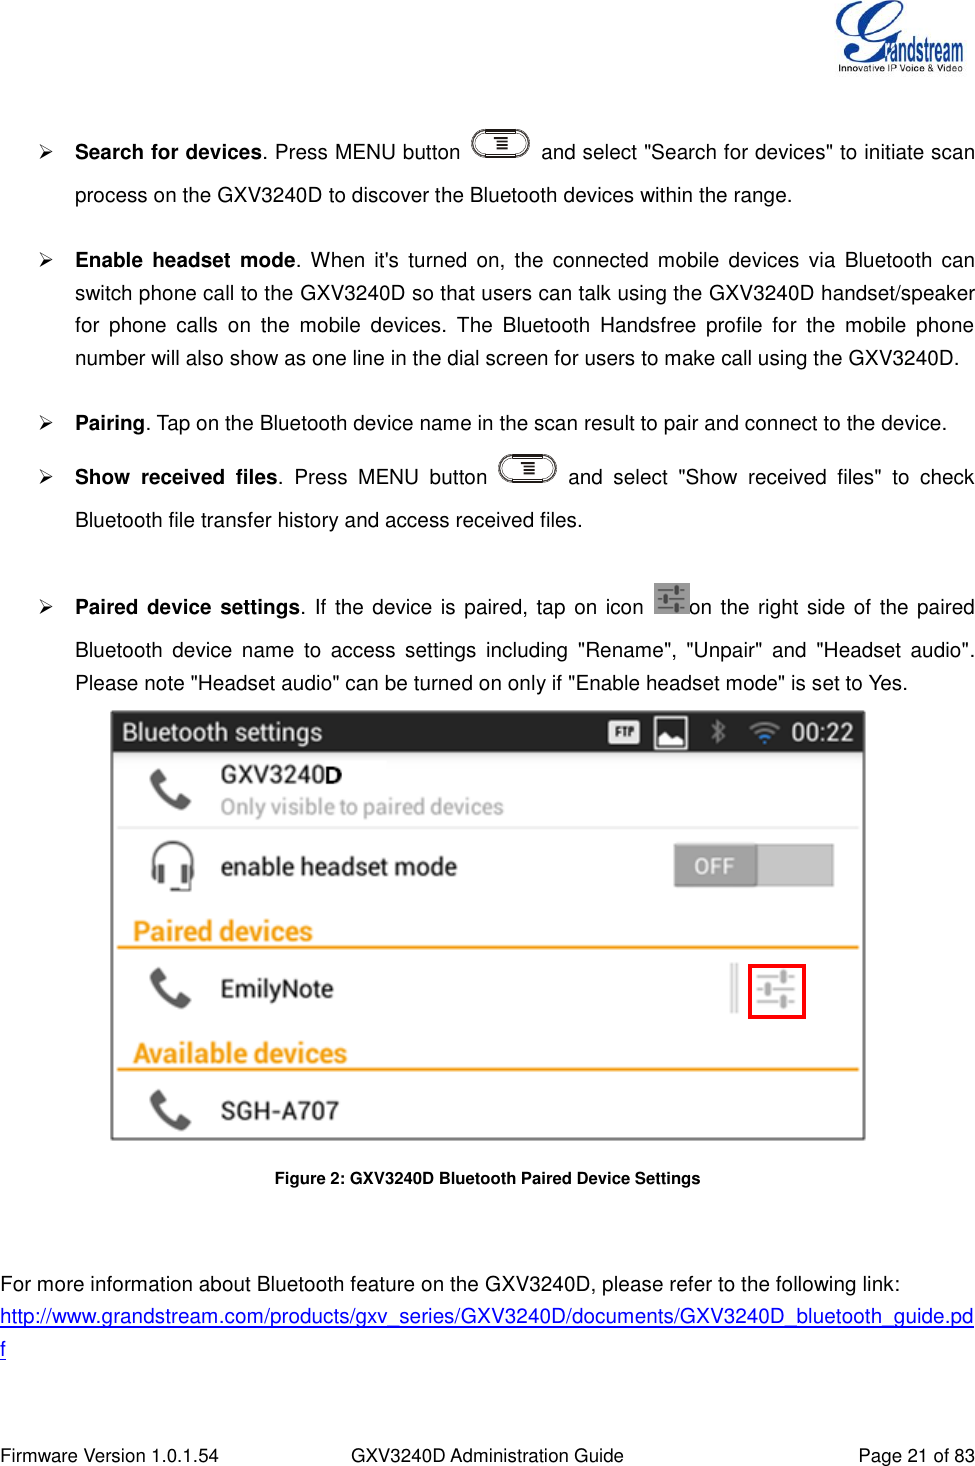  Firmware Version 1.0.1.54 GXV3240D Administration Guide Page 21 of 83    Search for devices. Press MENU button    and select &quot;Search for devices&quot; to initiate scan process on the GXV3240D to discover the Bluetooth devices within the range.   Enable  headset  mode. When  it&apos;s  turned  on,  the  connected  mobile  devices  via  Bluetooth  can switch phone call to the GXV3240D so that users can talk using the GXV3240D handset/speaker for  phone  calls  on  the  mobile  devices.  The  Bluetooth  Handsfree  profile  for  the  mobile  phone number will also show as one line in the dial screen for users to make call using the GXV3240D.   Pairing. Tap on the Bluetooth device name in the scan result to pair and connect to the device.  Show  received  files.  Press  MENU  button    and  select  &quot;Show  received  files&quot;  to  check Bluetooth file transfer history and access received files.   Paired device settings. If the device is paired, tap on icon  on the right side of the paired Bluetooth  device  name  to  access  settings  including  &quot;Rename&quot;,  &quot;Unpair&quot;  and  &quot;Headset  audio&quot;. Please note &quot;Headset audio&quot; can be turned on only if &quot;Enable headset mode&quot; is set to Yes.  Figure 2: GXV3240D Bluetooth Paired Device Settings   For more information about Bluetooth feature on the GXV3240D, please refer to the following link: http://www.grandstream.com/products/gxv_series/GXV3240D/documents/GXV3240D_bluetooth_guide.pdf  